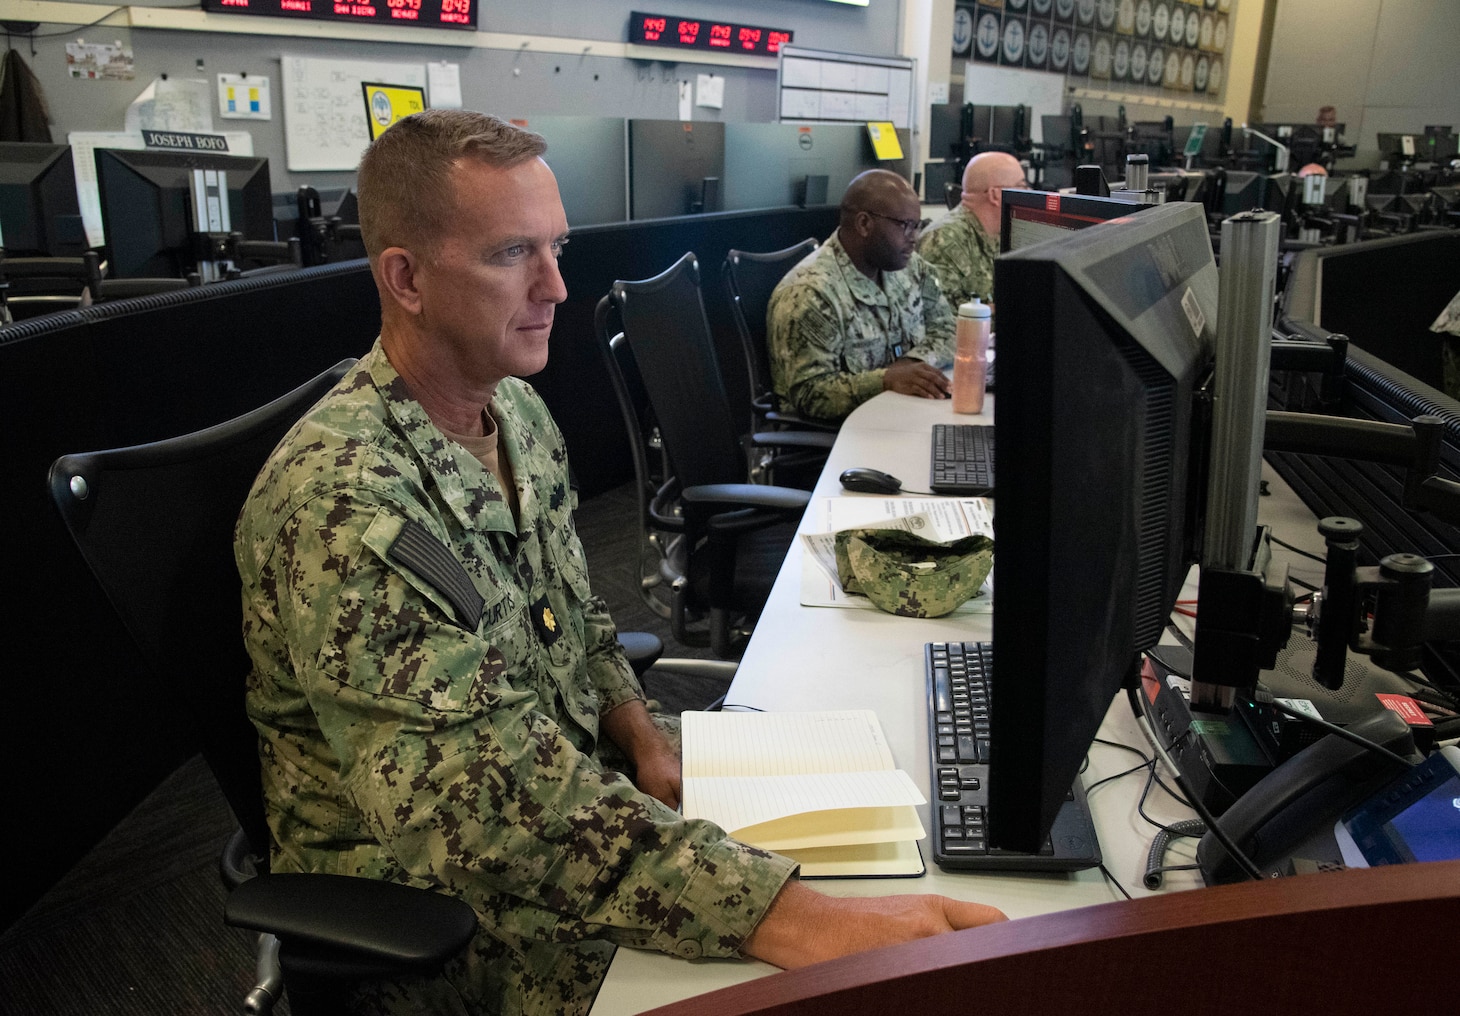 Lt. Cmdr. Thomas Curtis, an analyst attached to U.S. Naval Forces Central Command reviews information during a maritime operations center exercise in Norfolk. The maritime operations center exercise, comprised of 10 units, is a training exercise by Reserve Sailors, for Reserve Sailors to strategically align with mission requirements to support the fleet in the four lines of effort which are design, train, mobilize and develop. (U.S. Navy photo by Mass Communications Specialist 1st Class Helen Brown)